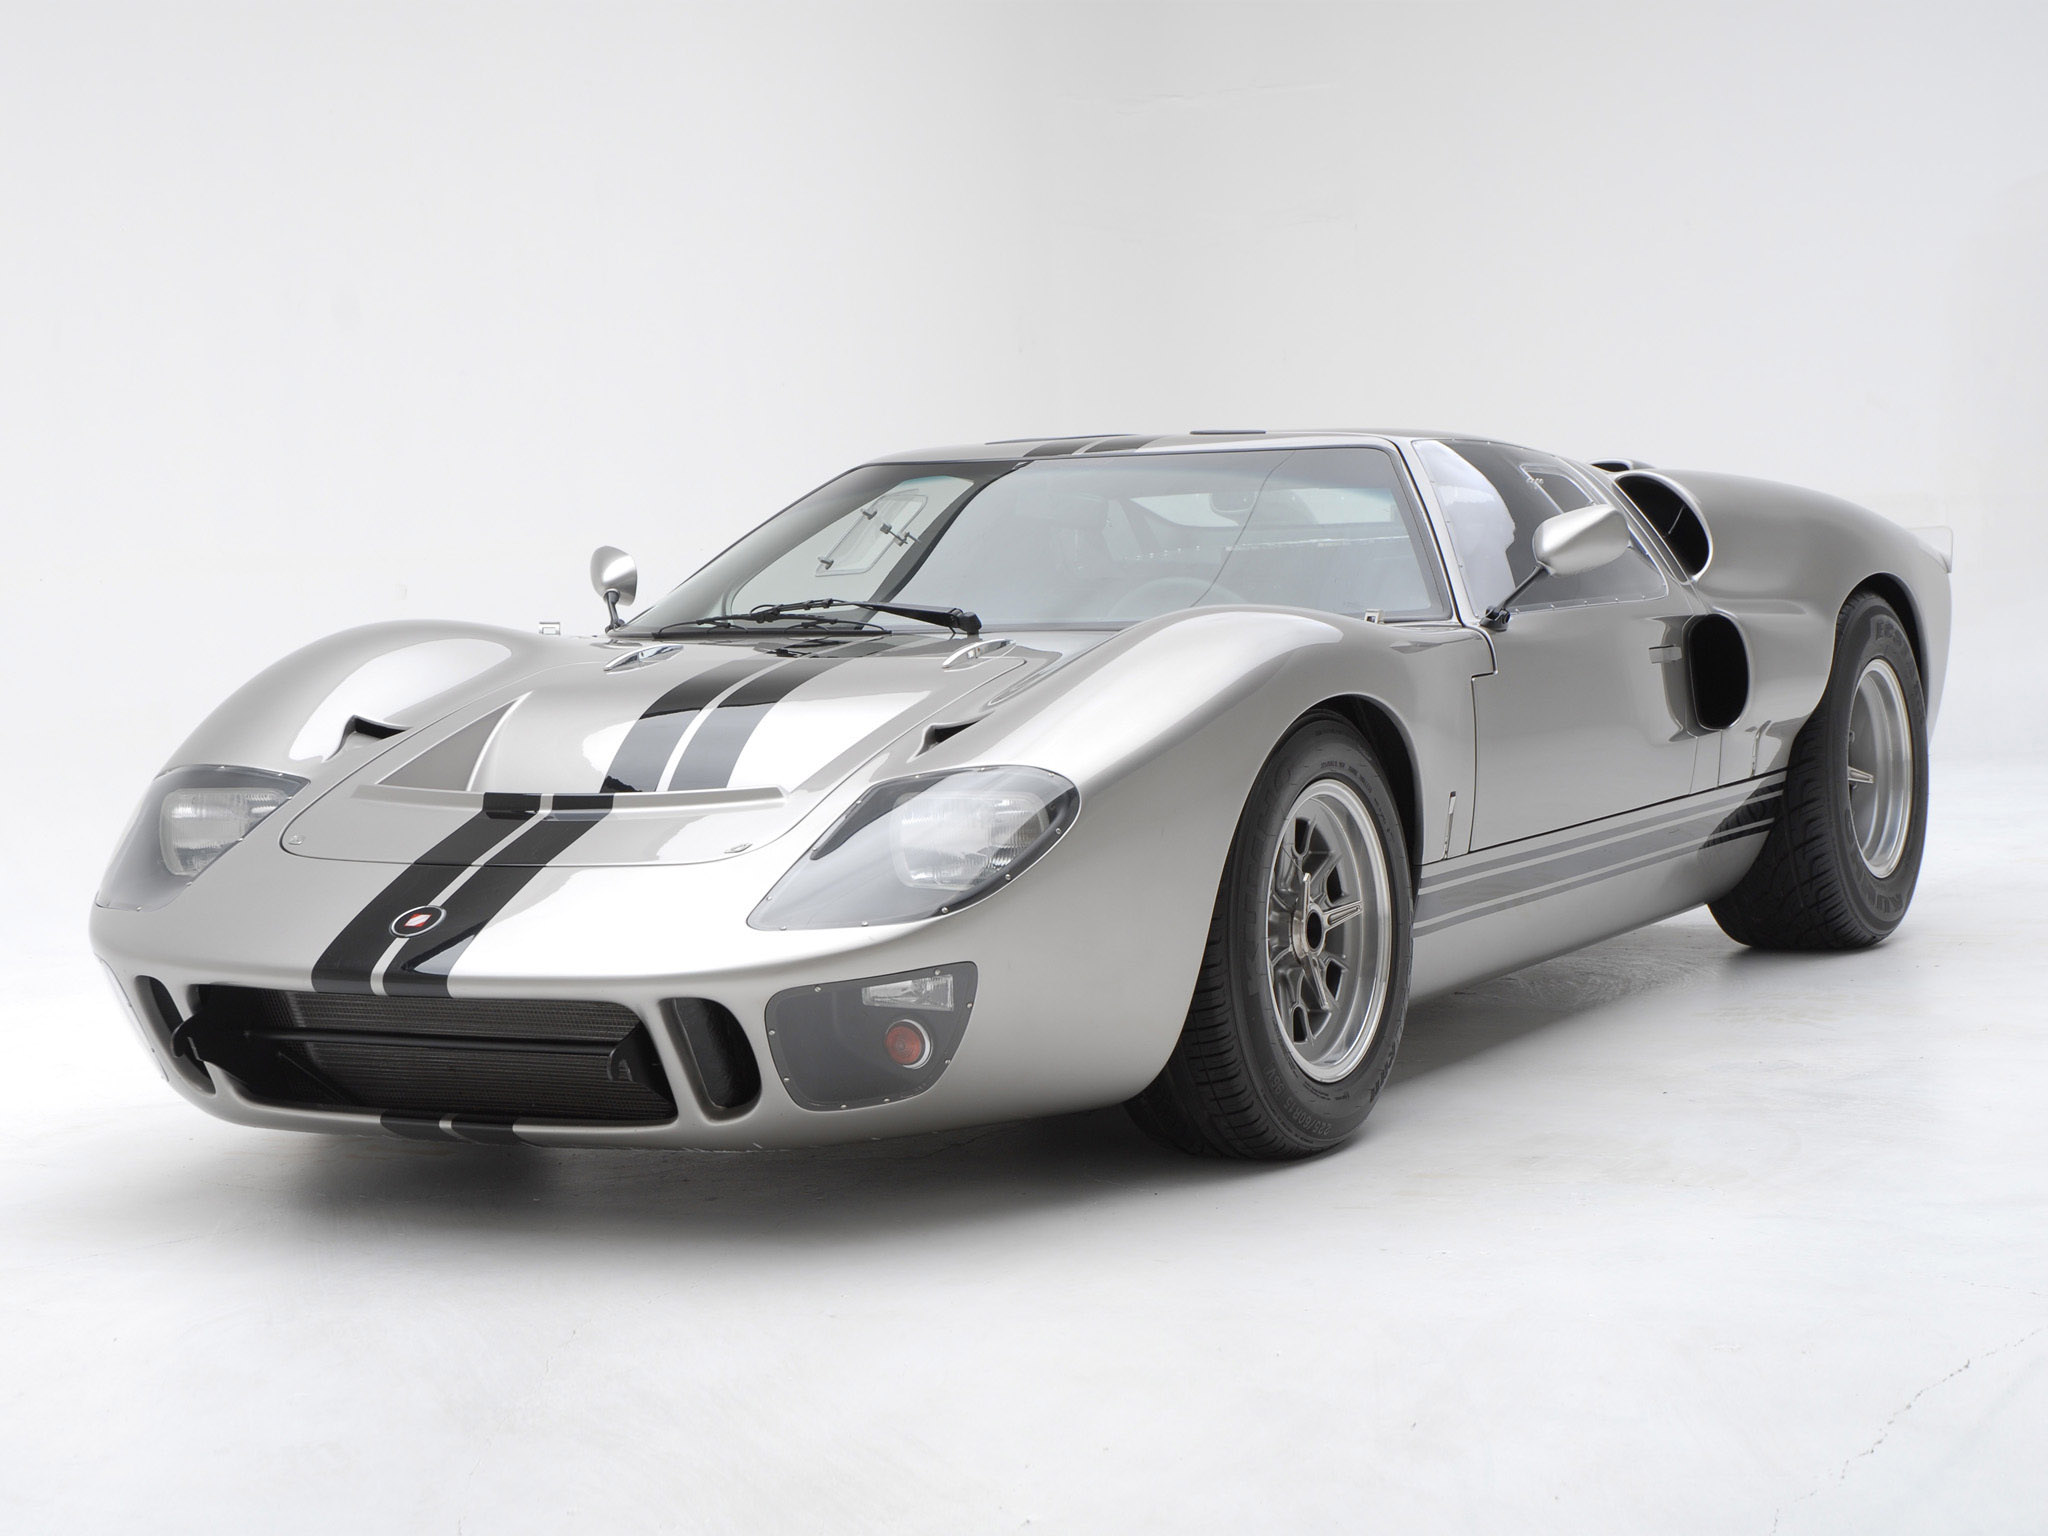 2006, Superformance, Ford, Gt40, Supercar, Supercars Wallpaper